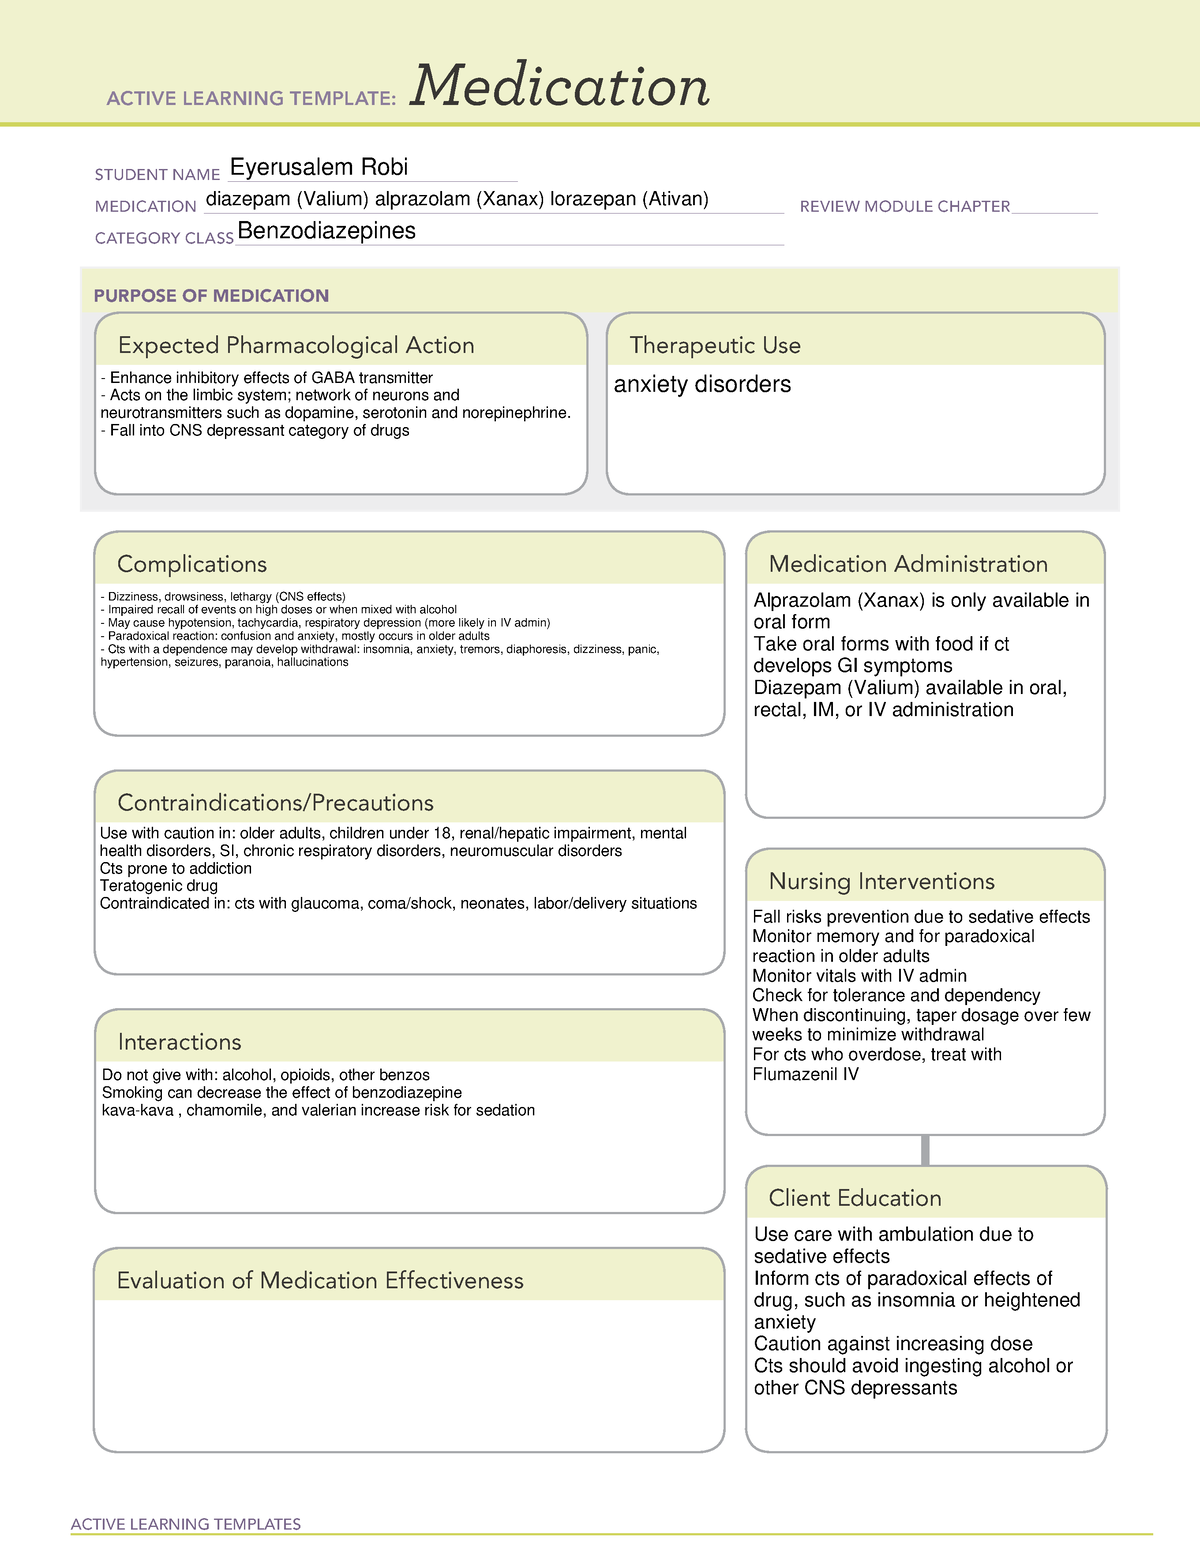 MED CARD Benzodiazepines ACTIVE LEARNING TEMPLATES Medication STUDENT